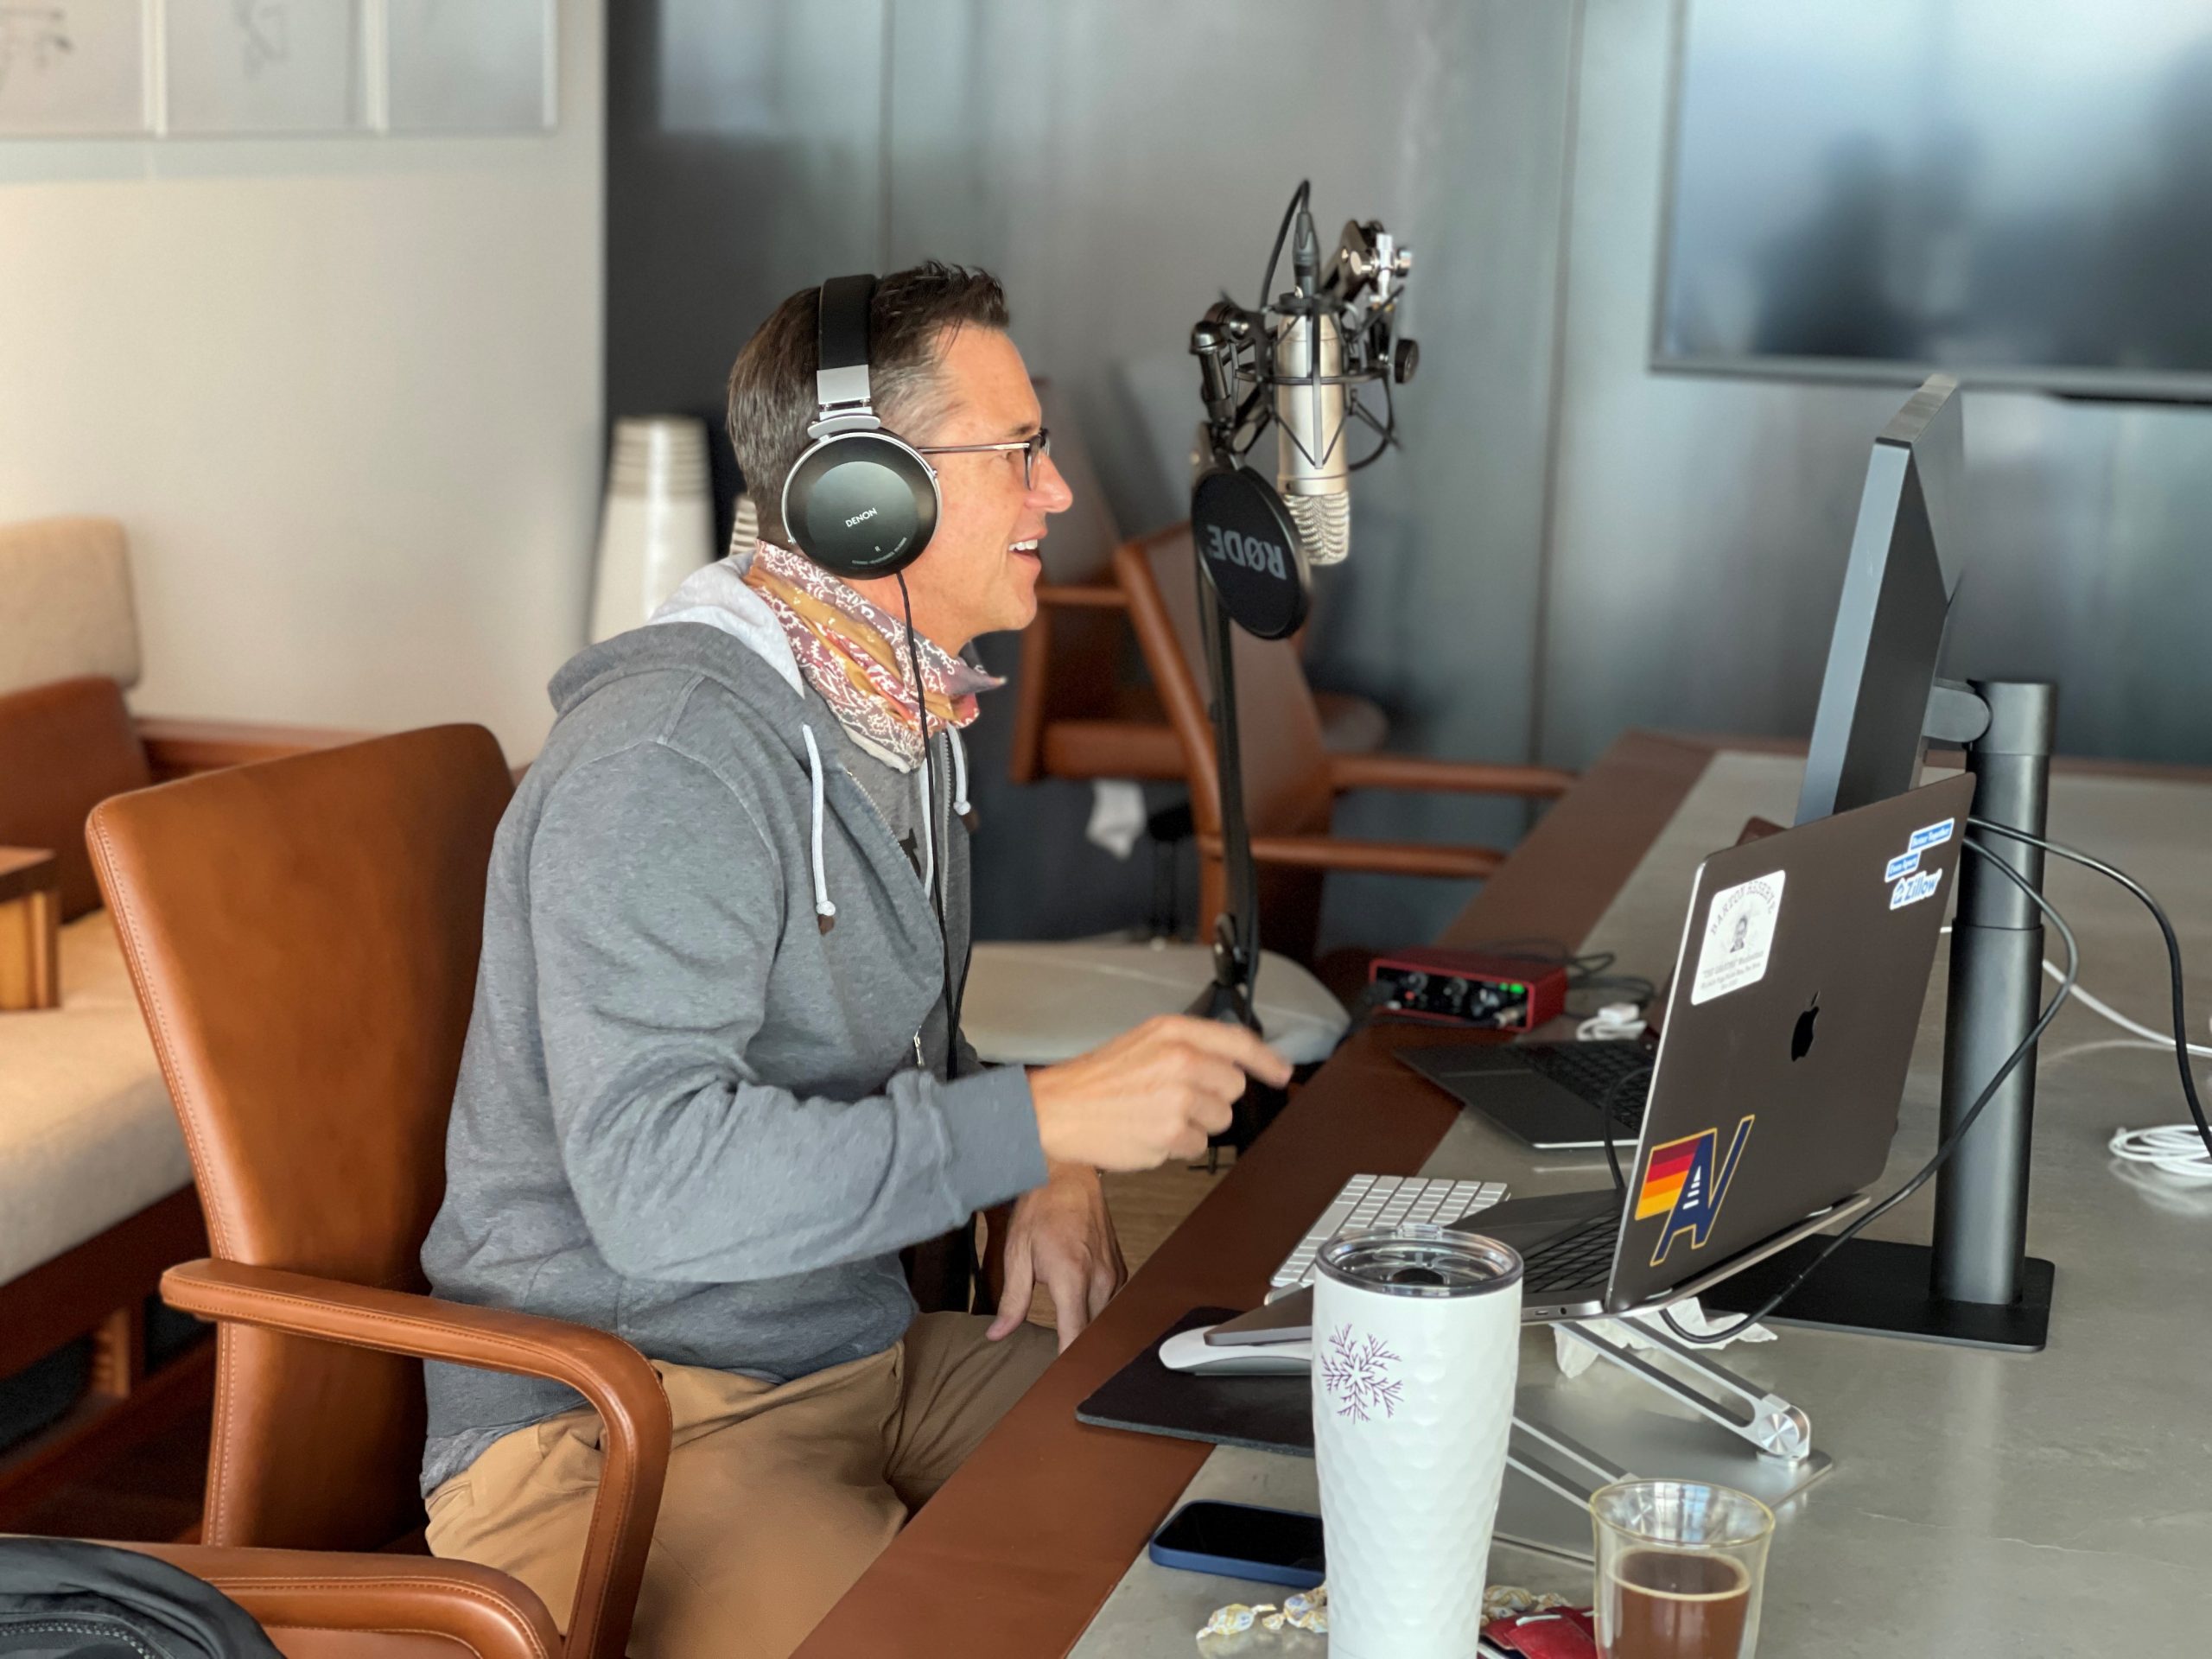 From Microsoft to Expedia to Zillow: Behind the scenes with Rich Barton on NPR’s ‘How I Built This’